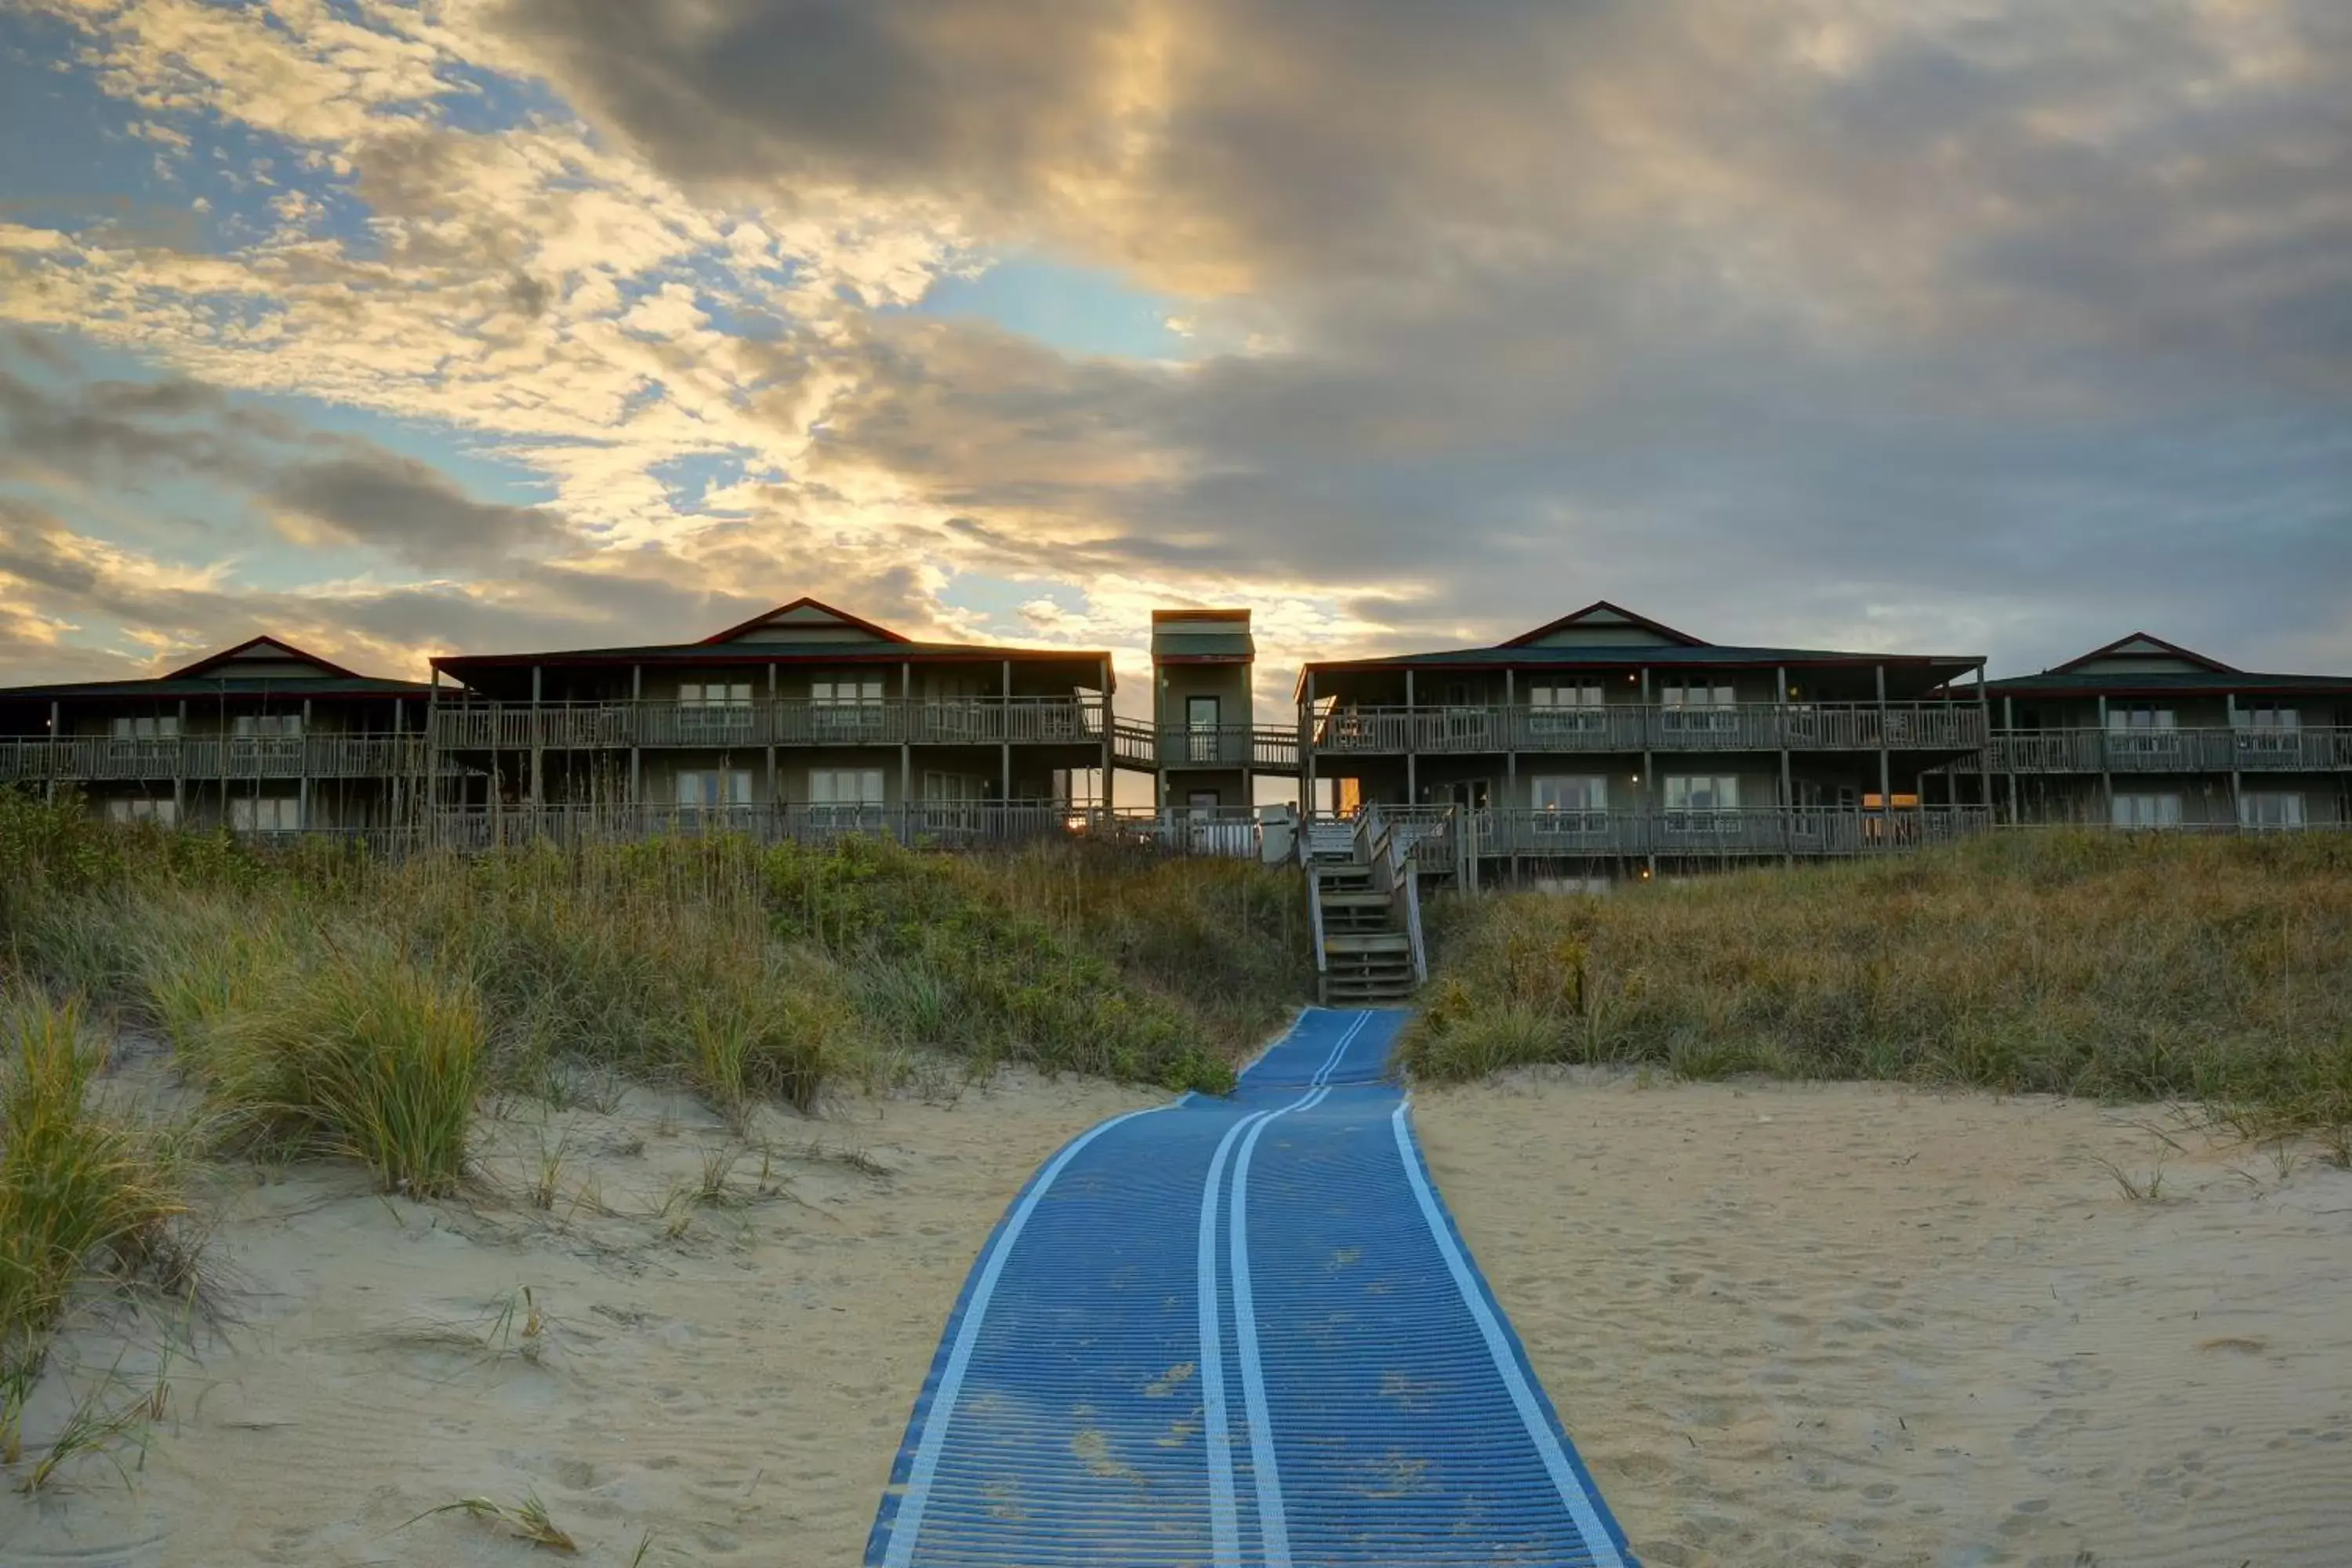 Property building in Outer Banks Beach Club